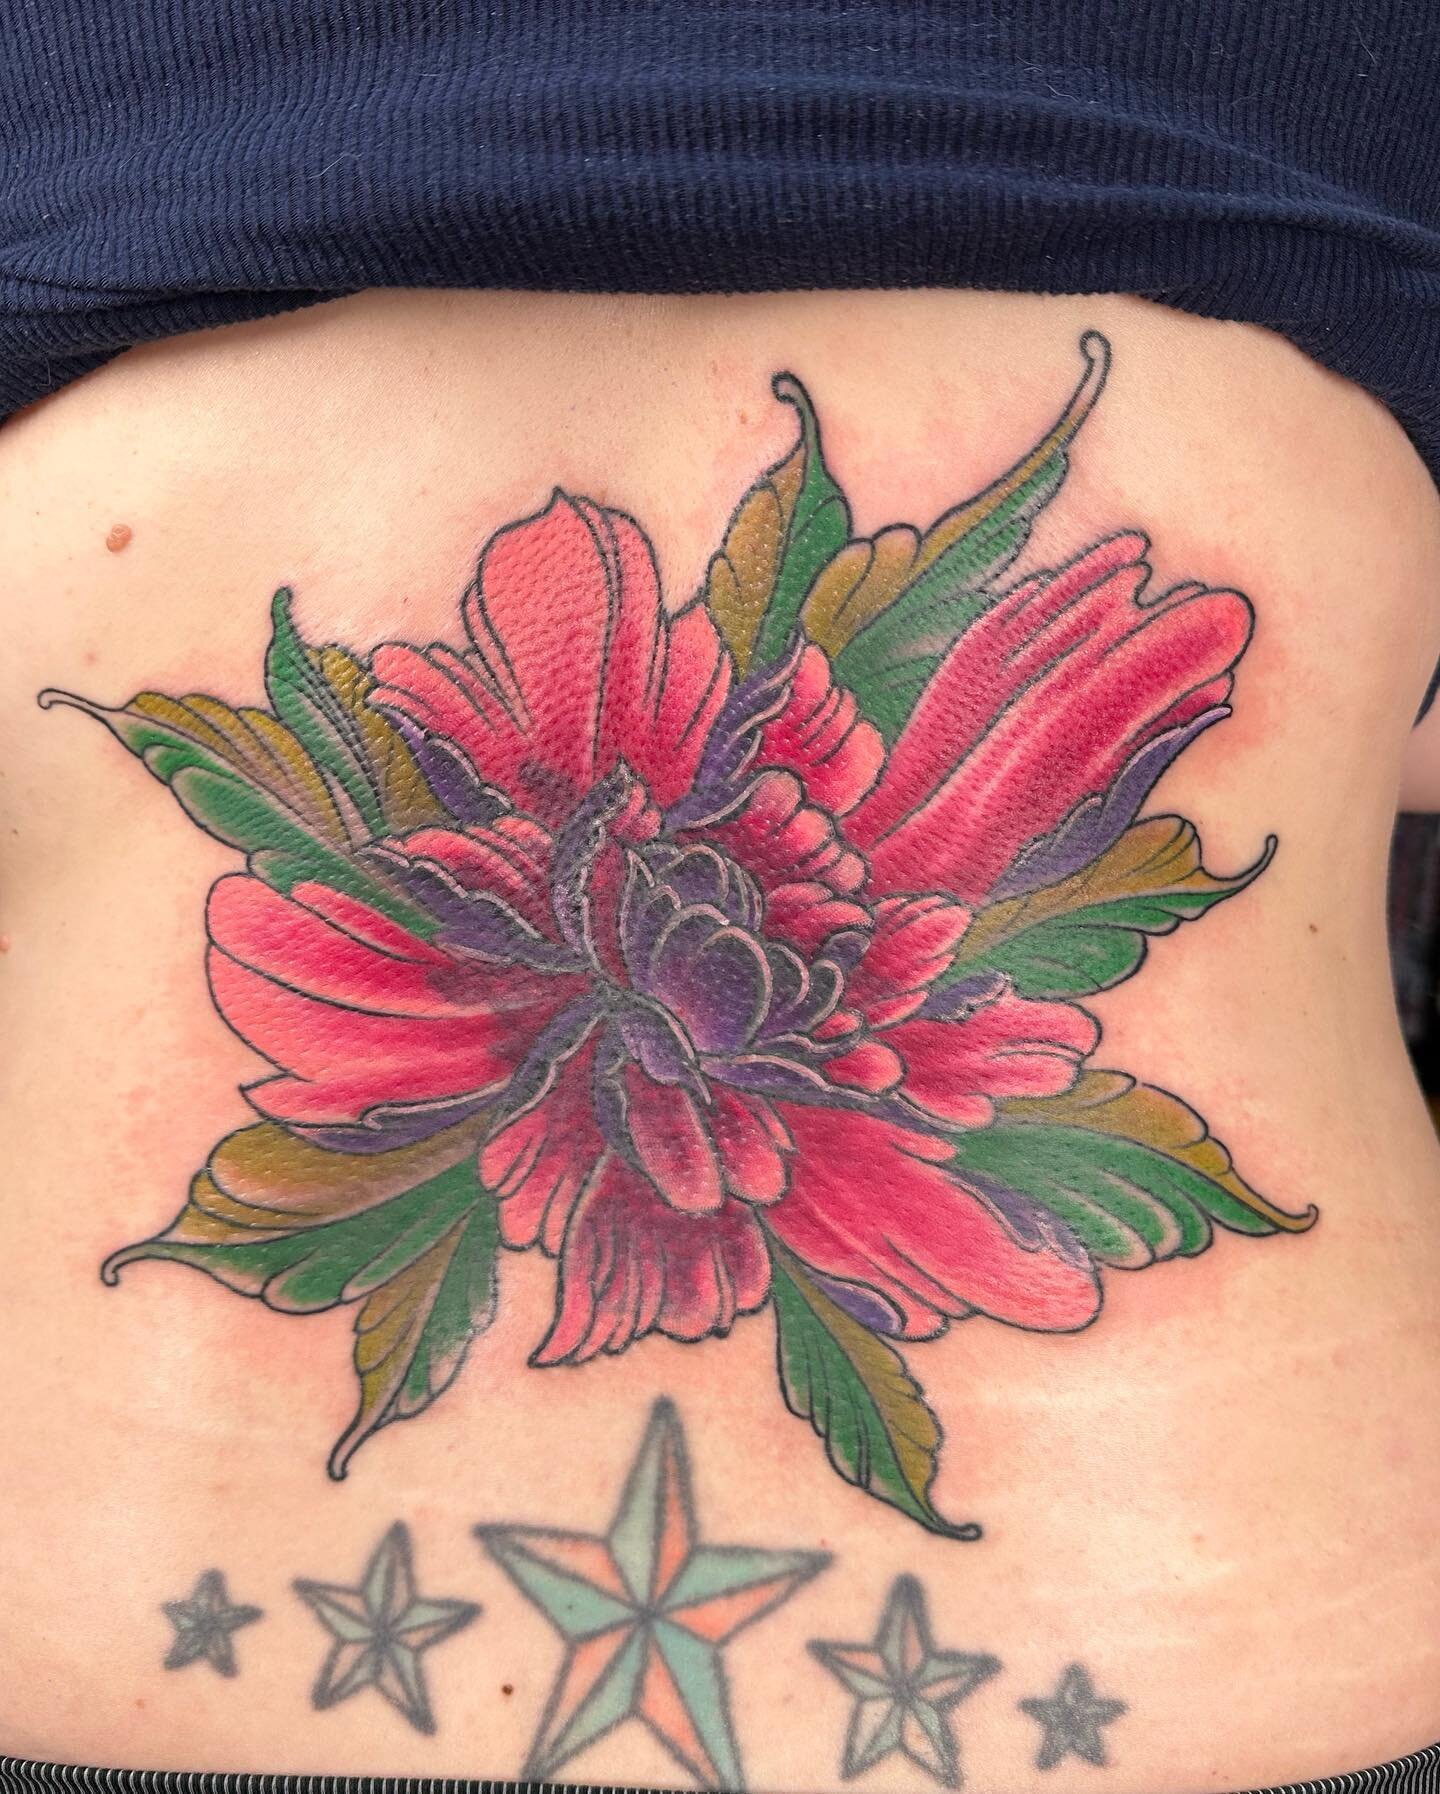 Finished this coverup the other day. Been a busy spring so far and looking forward to getting some bigger projects done soon. #tattoo #coveruptattoo #ocmd